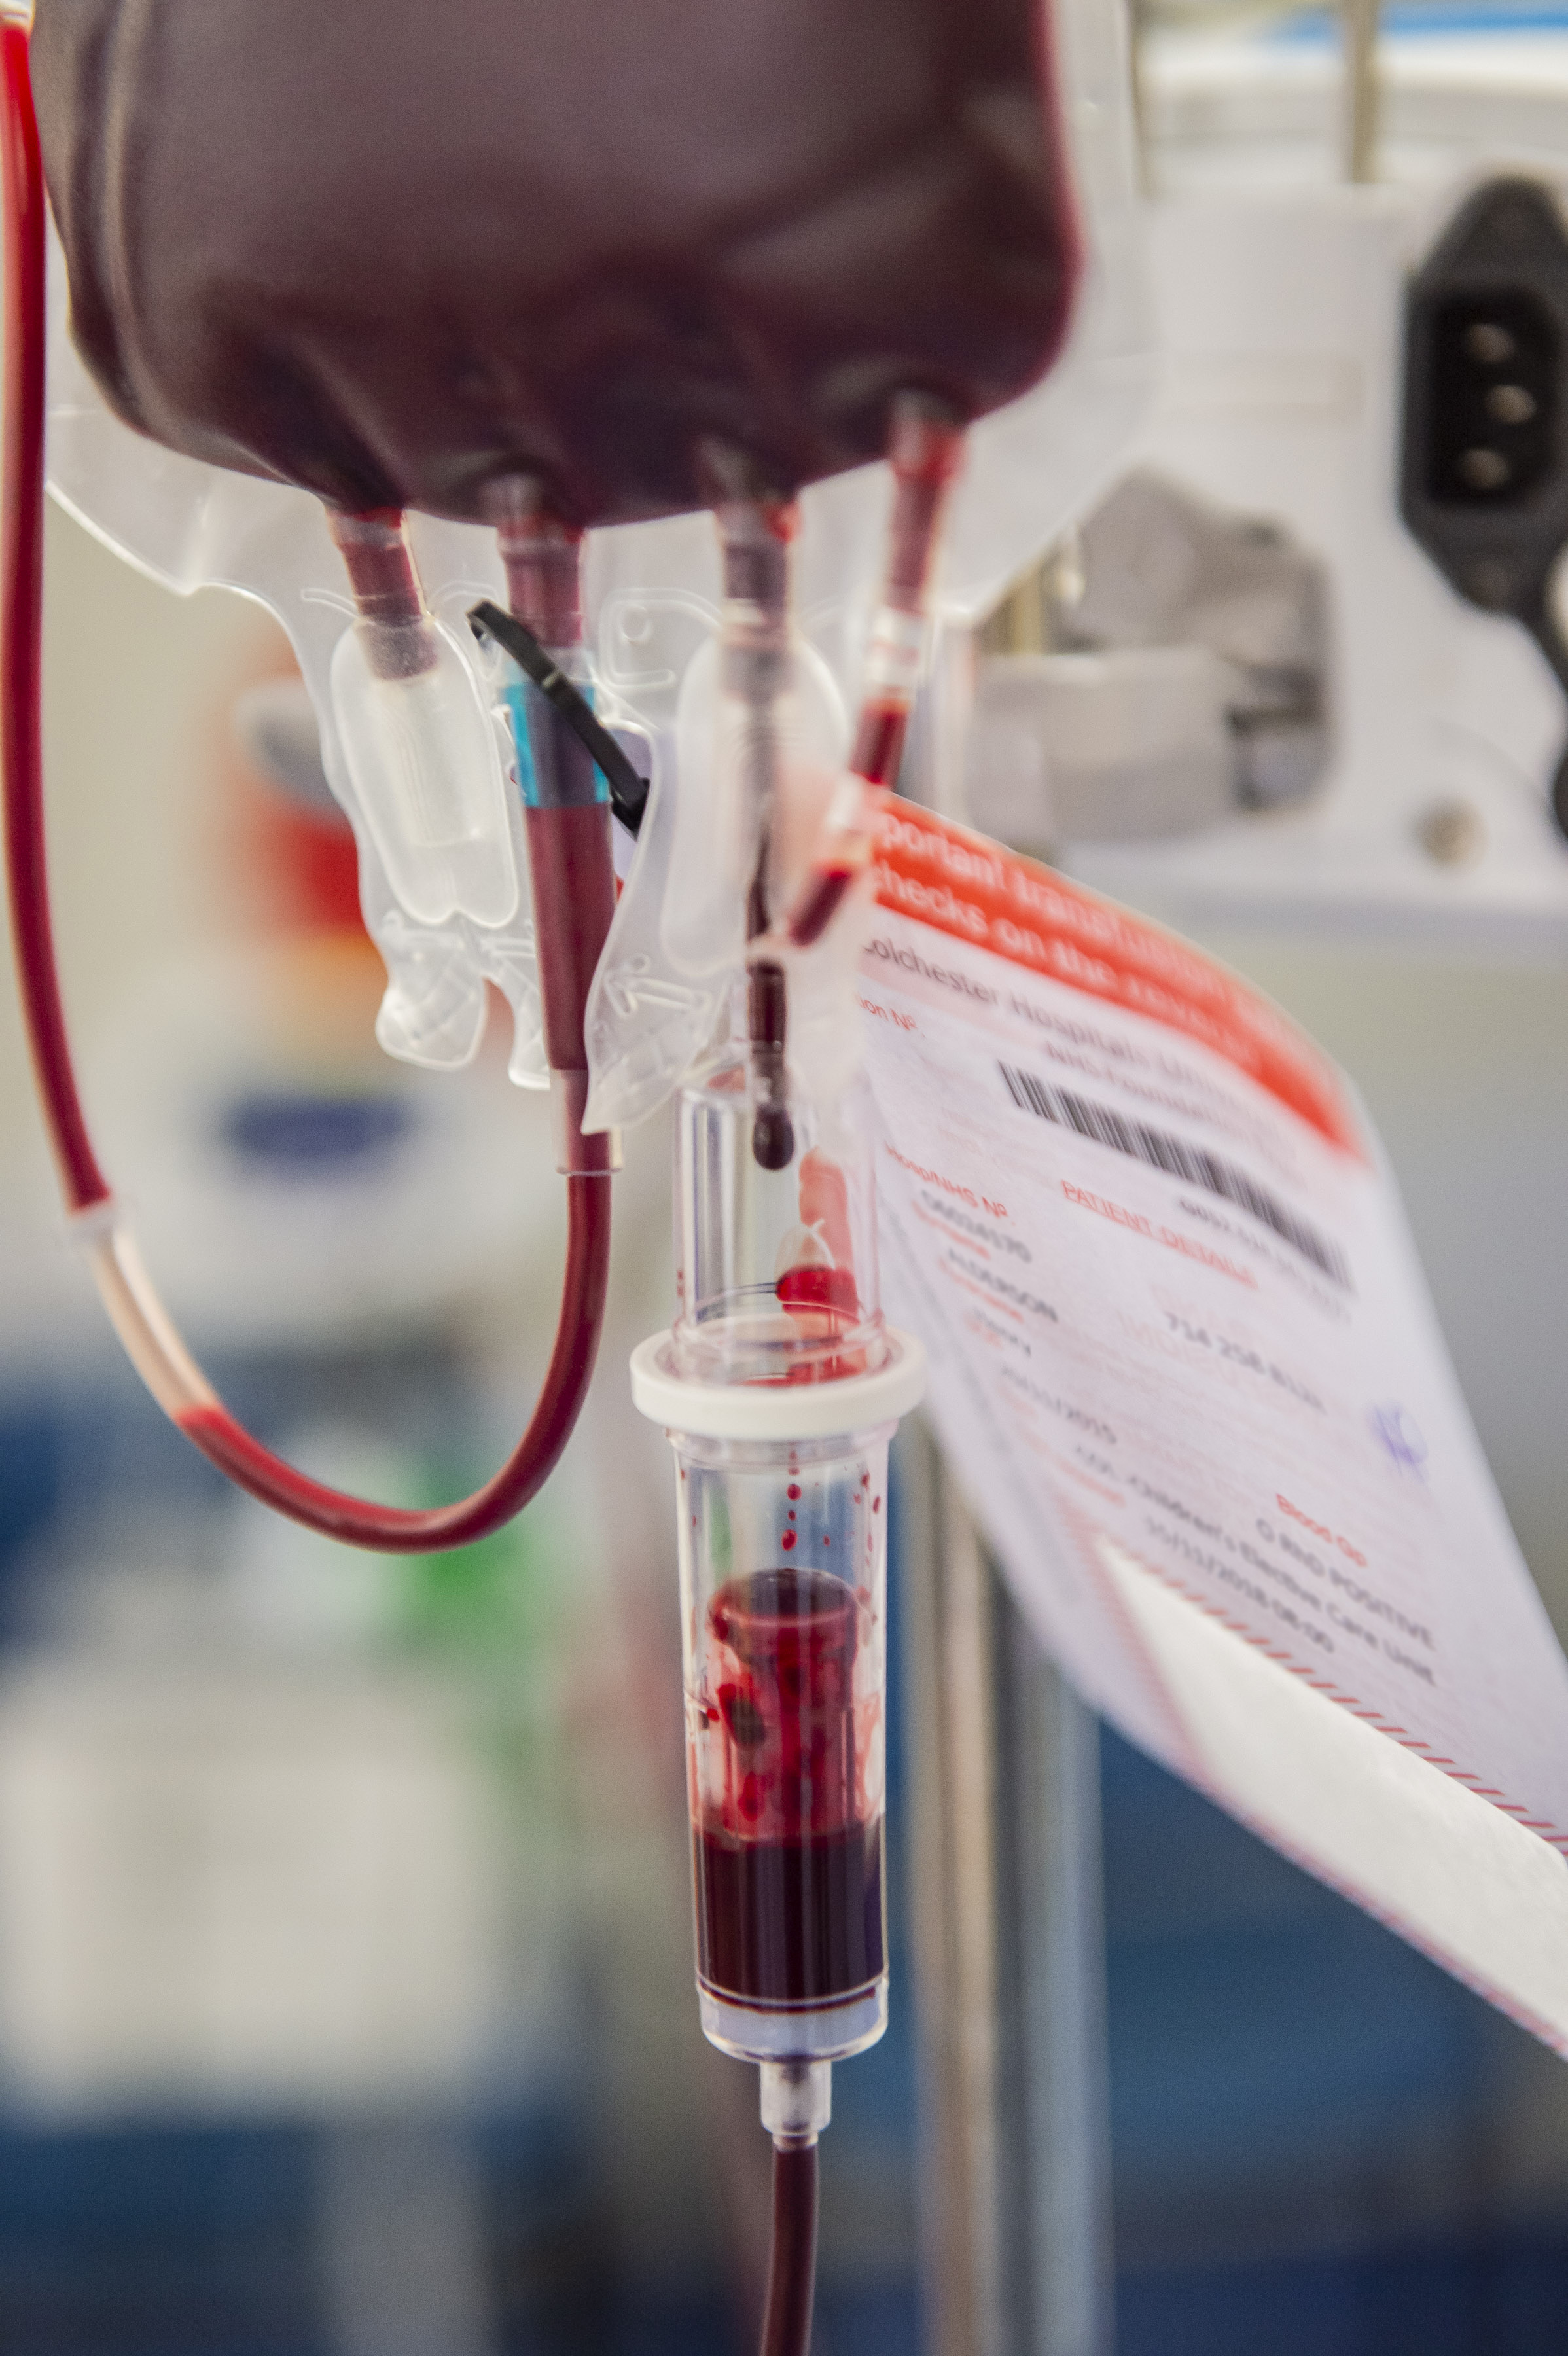 A blood bag during transfusion